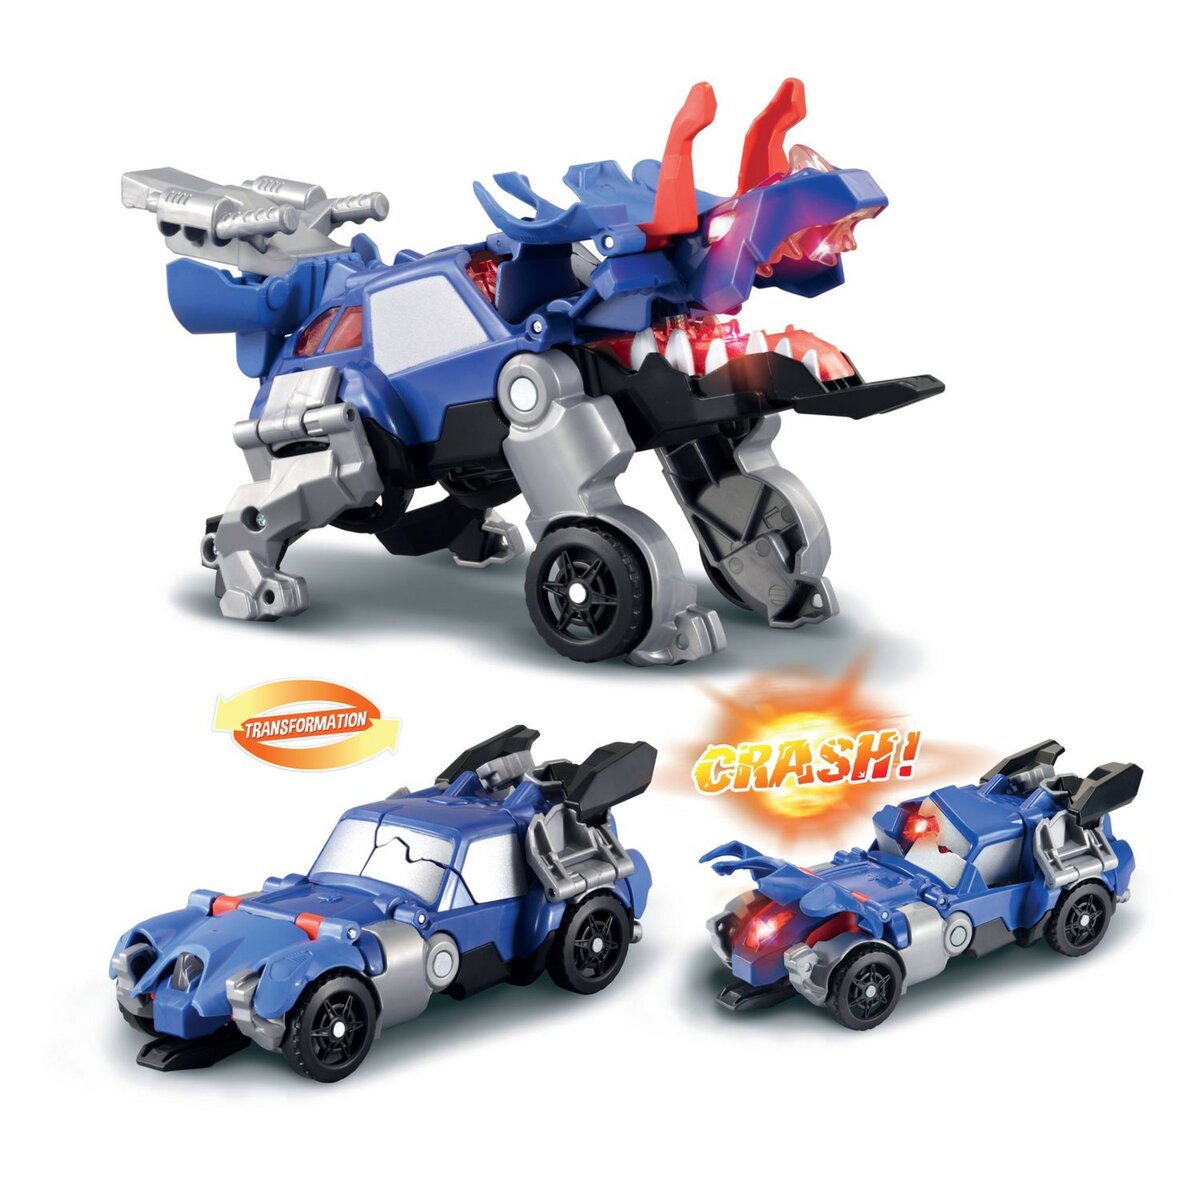 VTECH Switch and Go Dinos Crashkaops le Triceratops pas cher